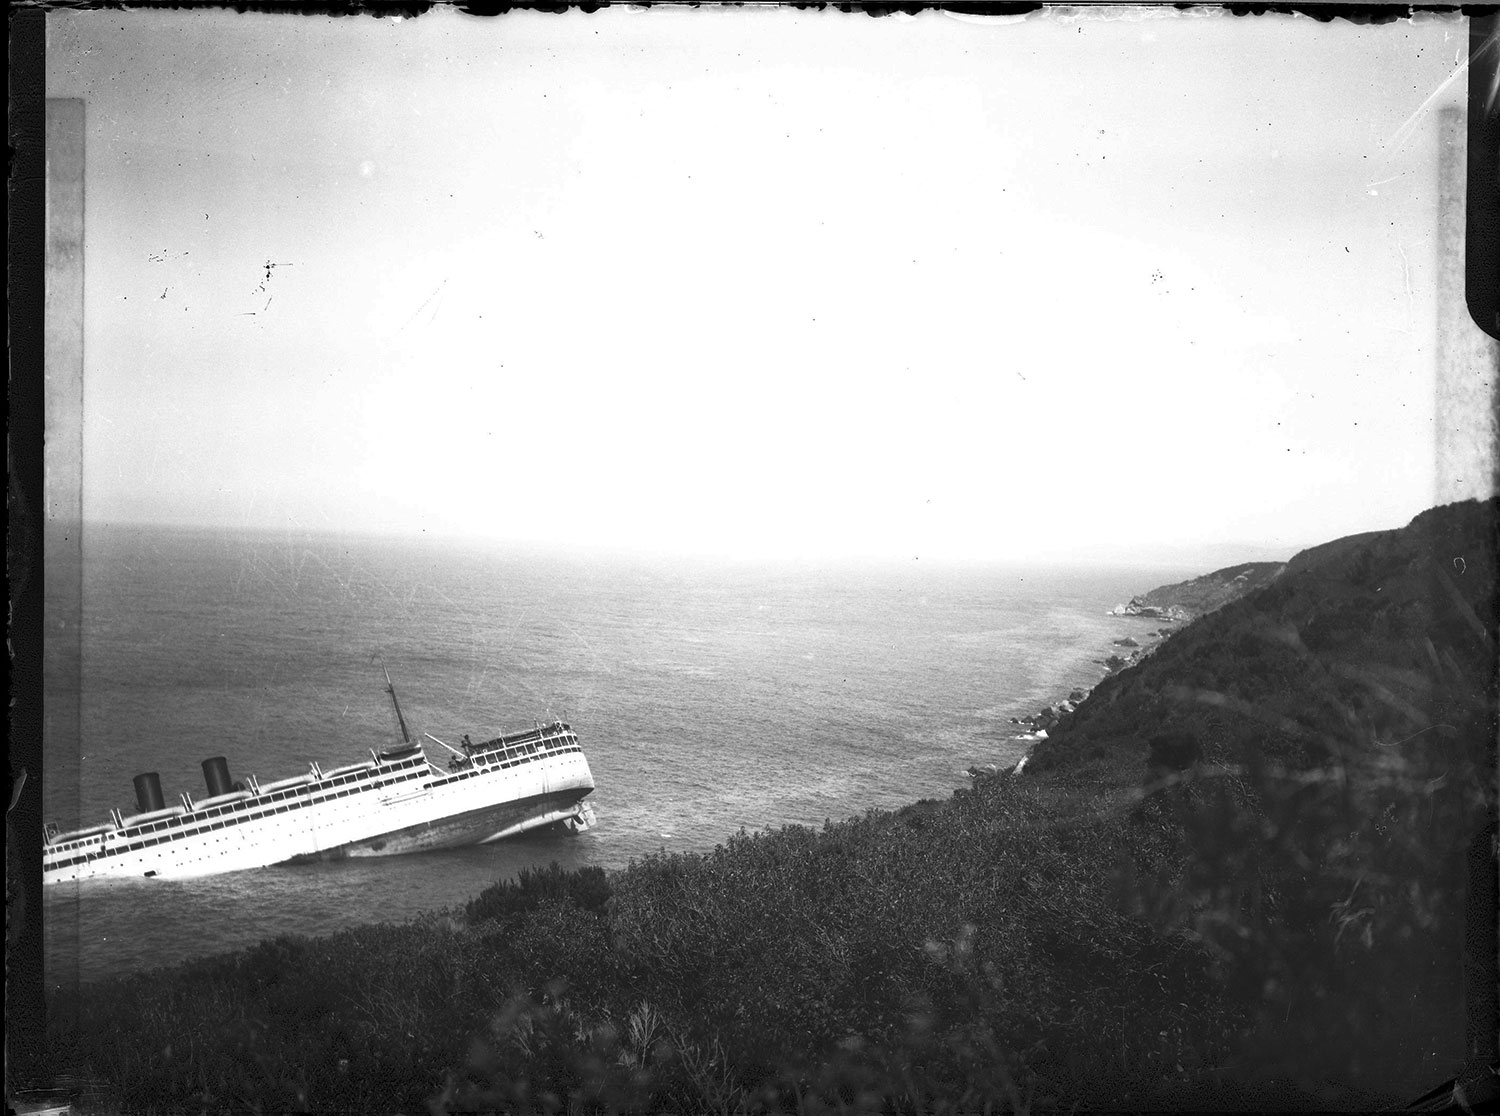 Malabata - View of a shipwreck from the coast